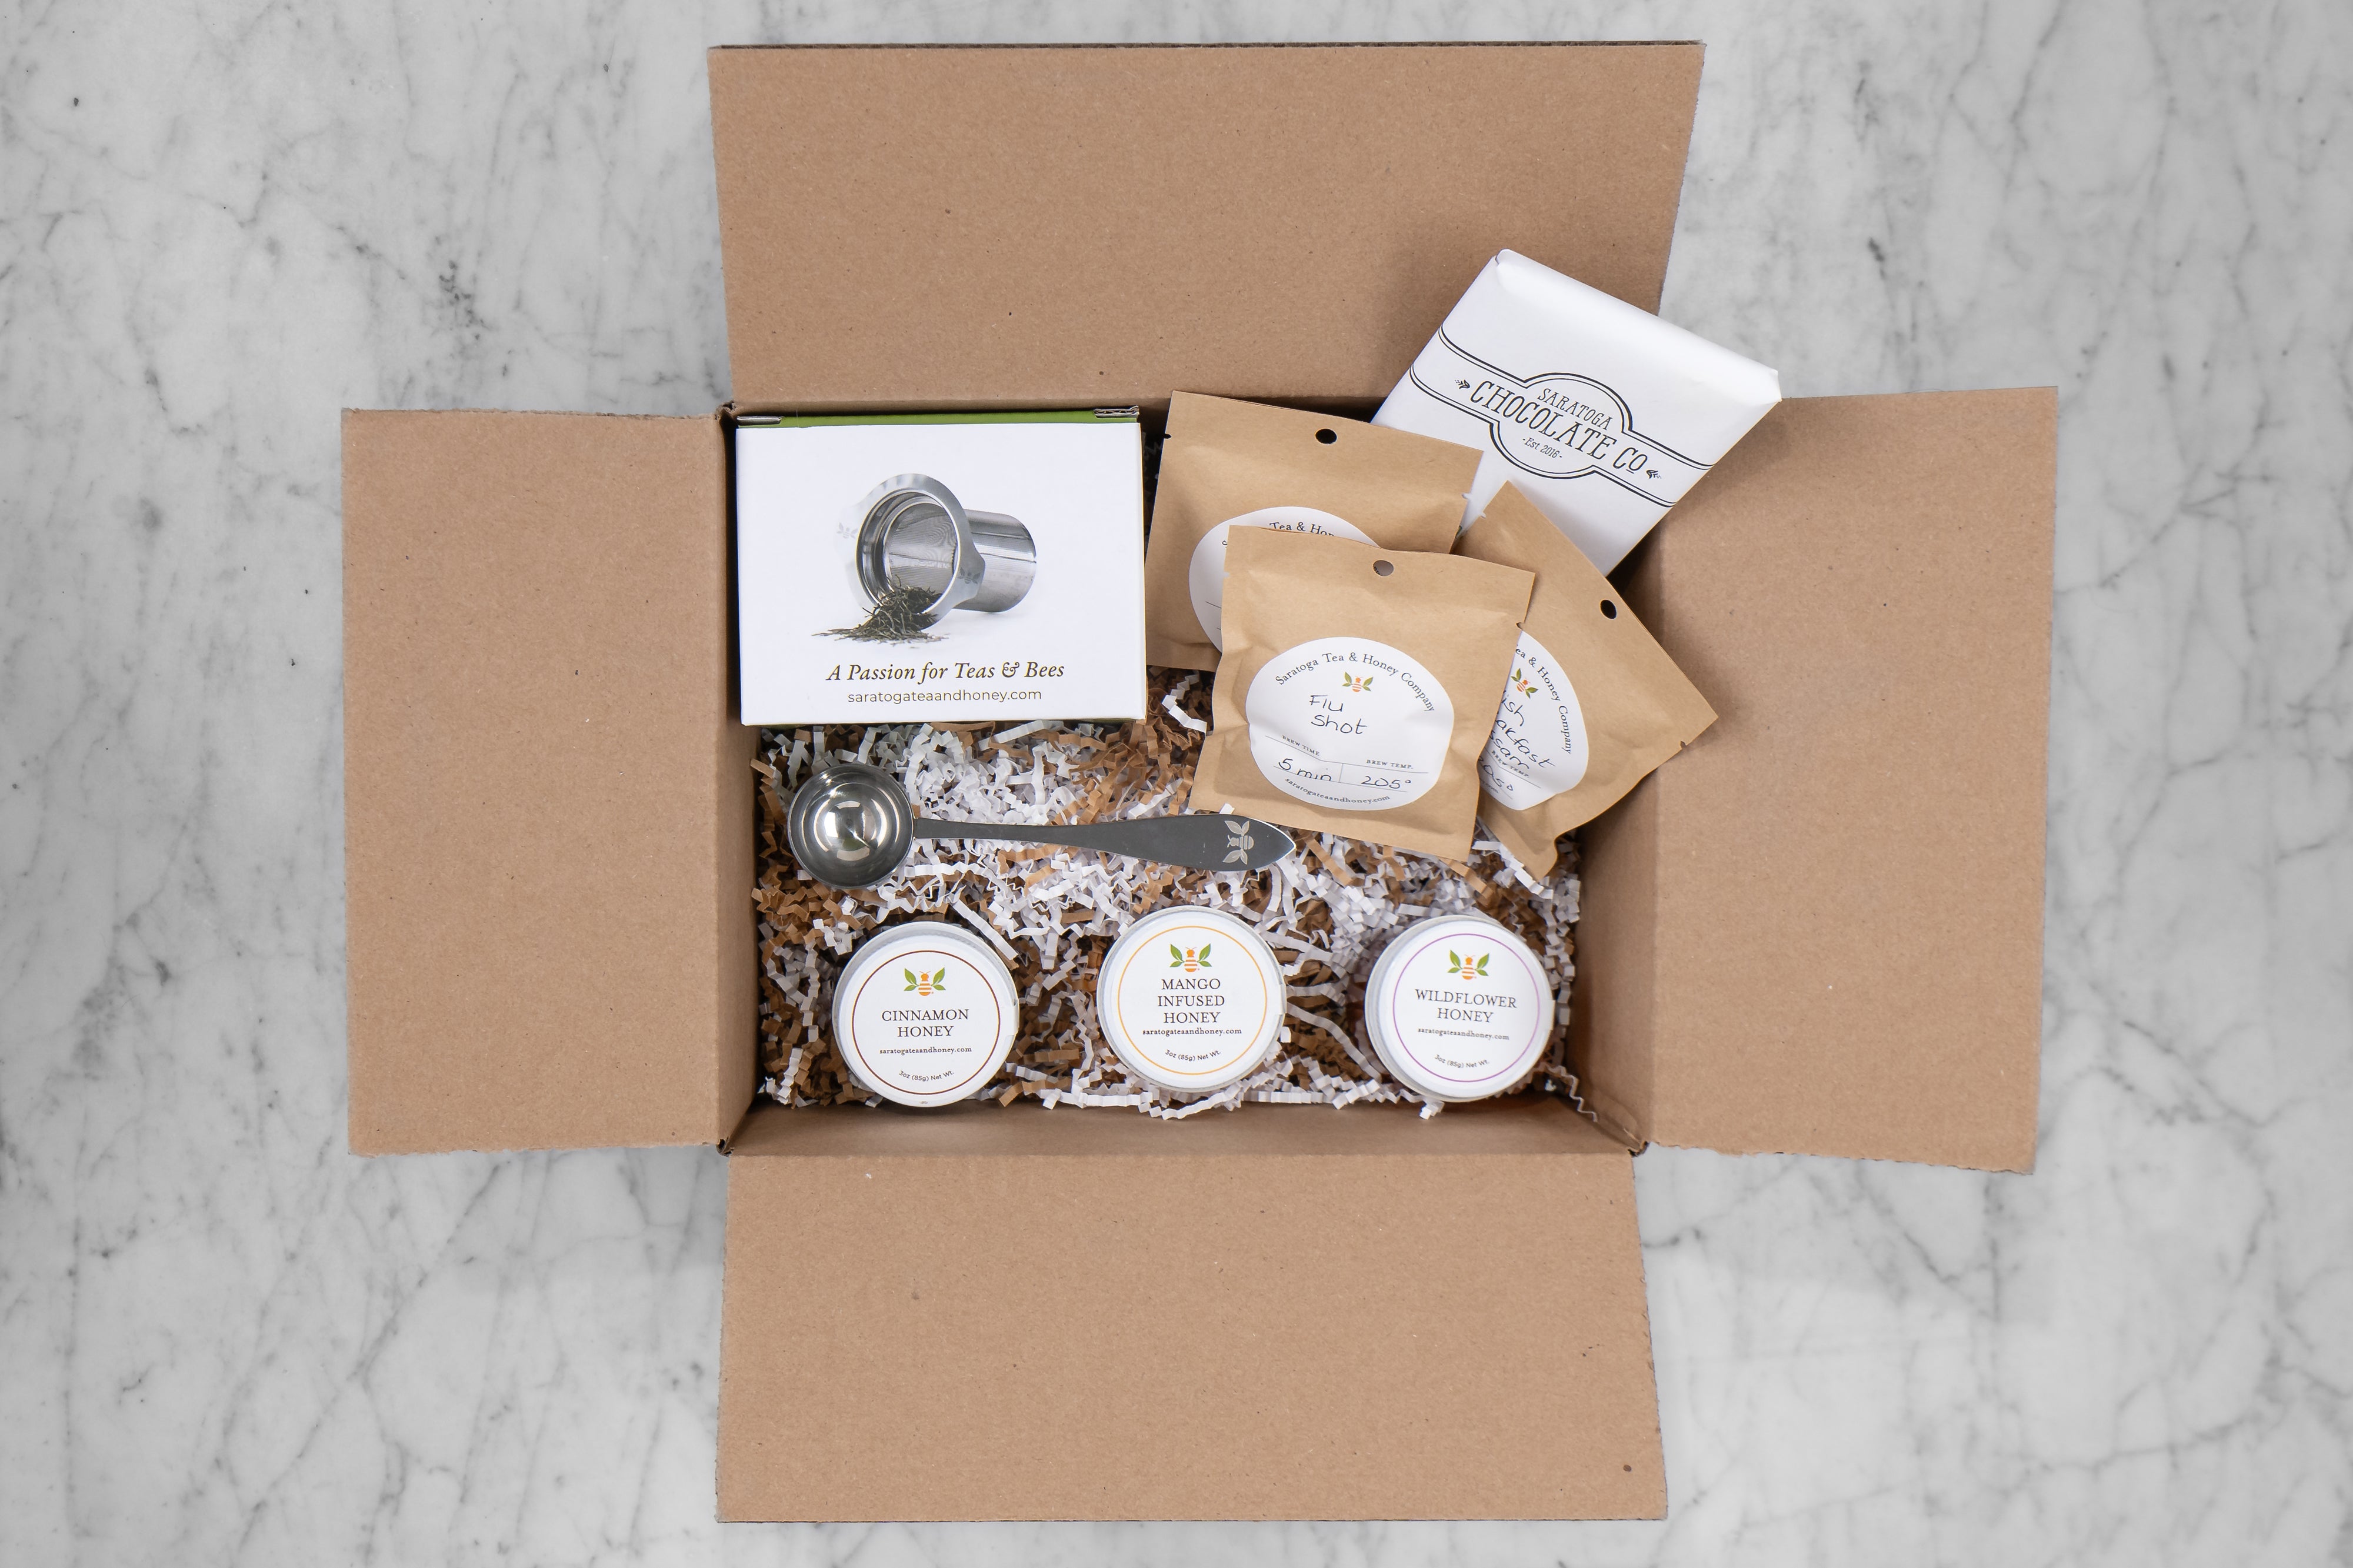 Honey Bee gift set in cardboard box with decorative fill. features three sample teas, three small honeys, tea infuser, tea scoop, and local chocolate bar